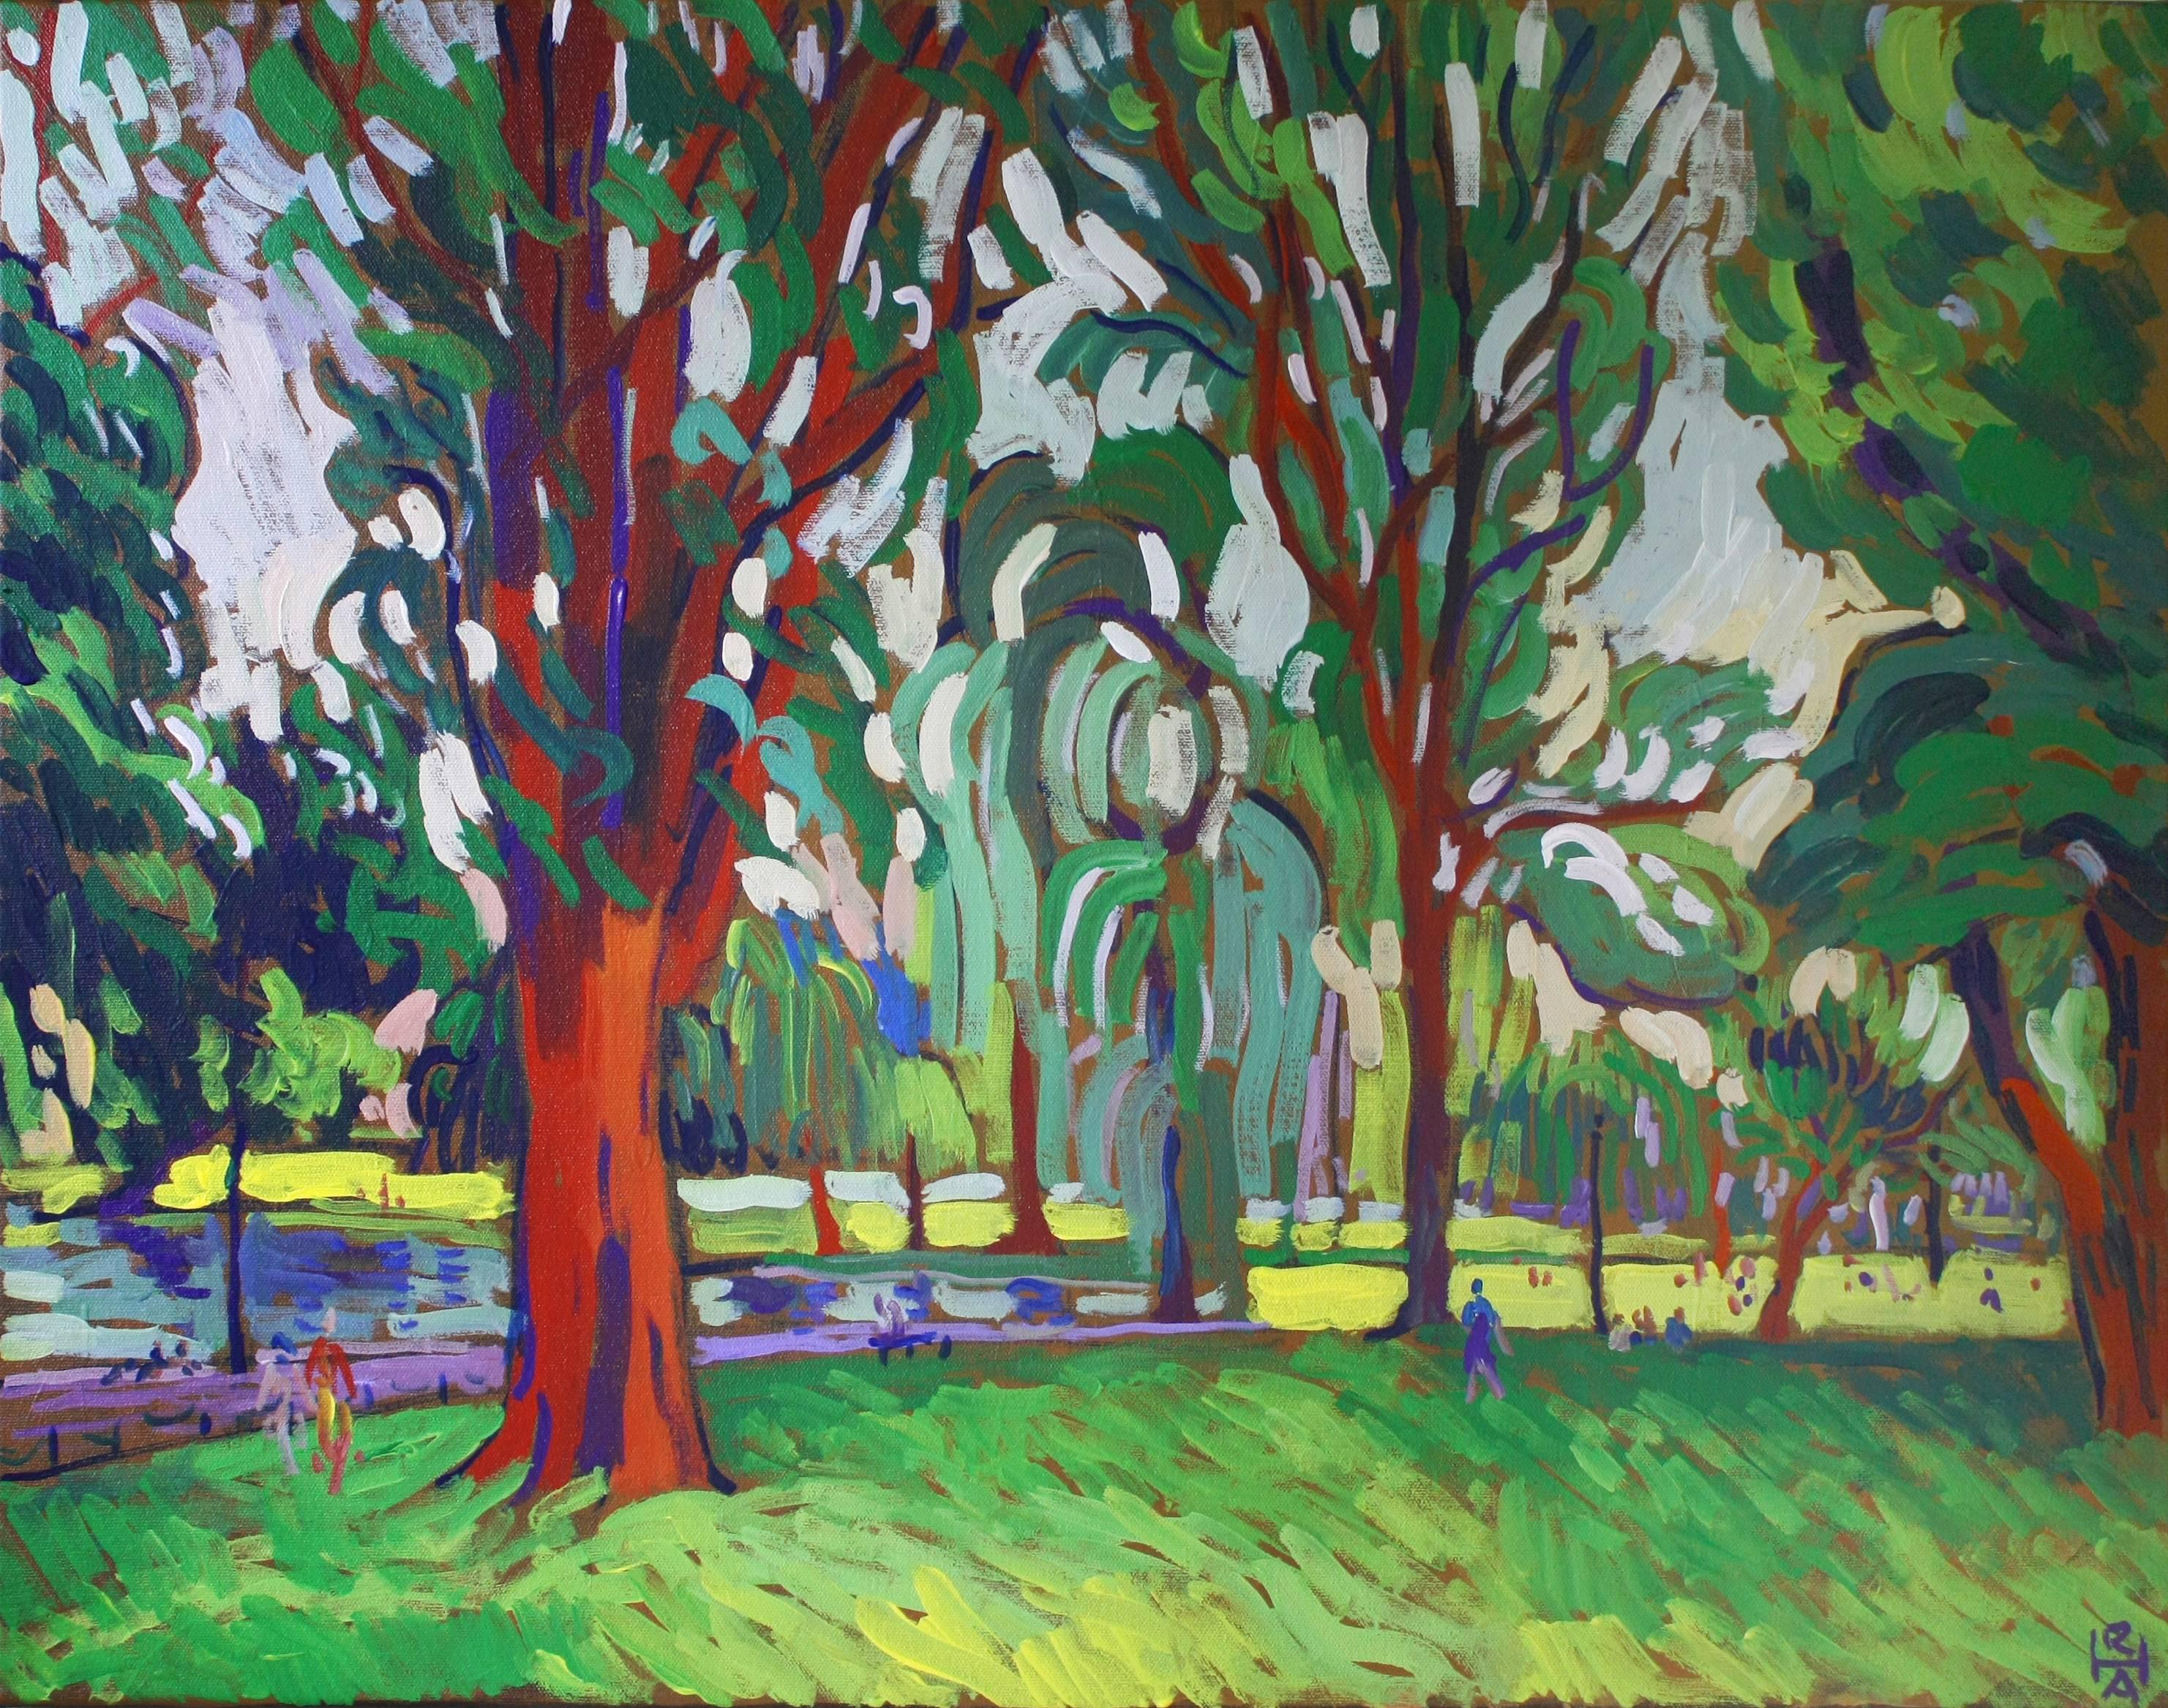 Public Garden, Boston Robert Hofherr Acrylic painting on stretched canvas One-of-a-kind Signed on front 2015 22 in. h x 28 in. w x 1.37 in. d 3 lbs. 0 oz. Artist Comments This study of Boston's Public Garden originated with a personal photo taken